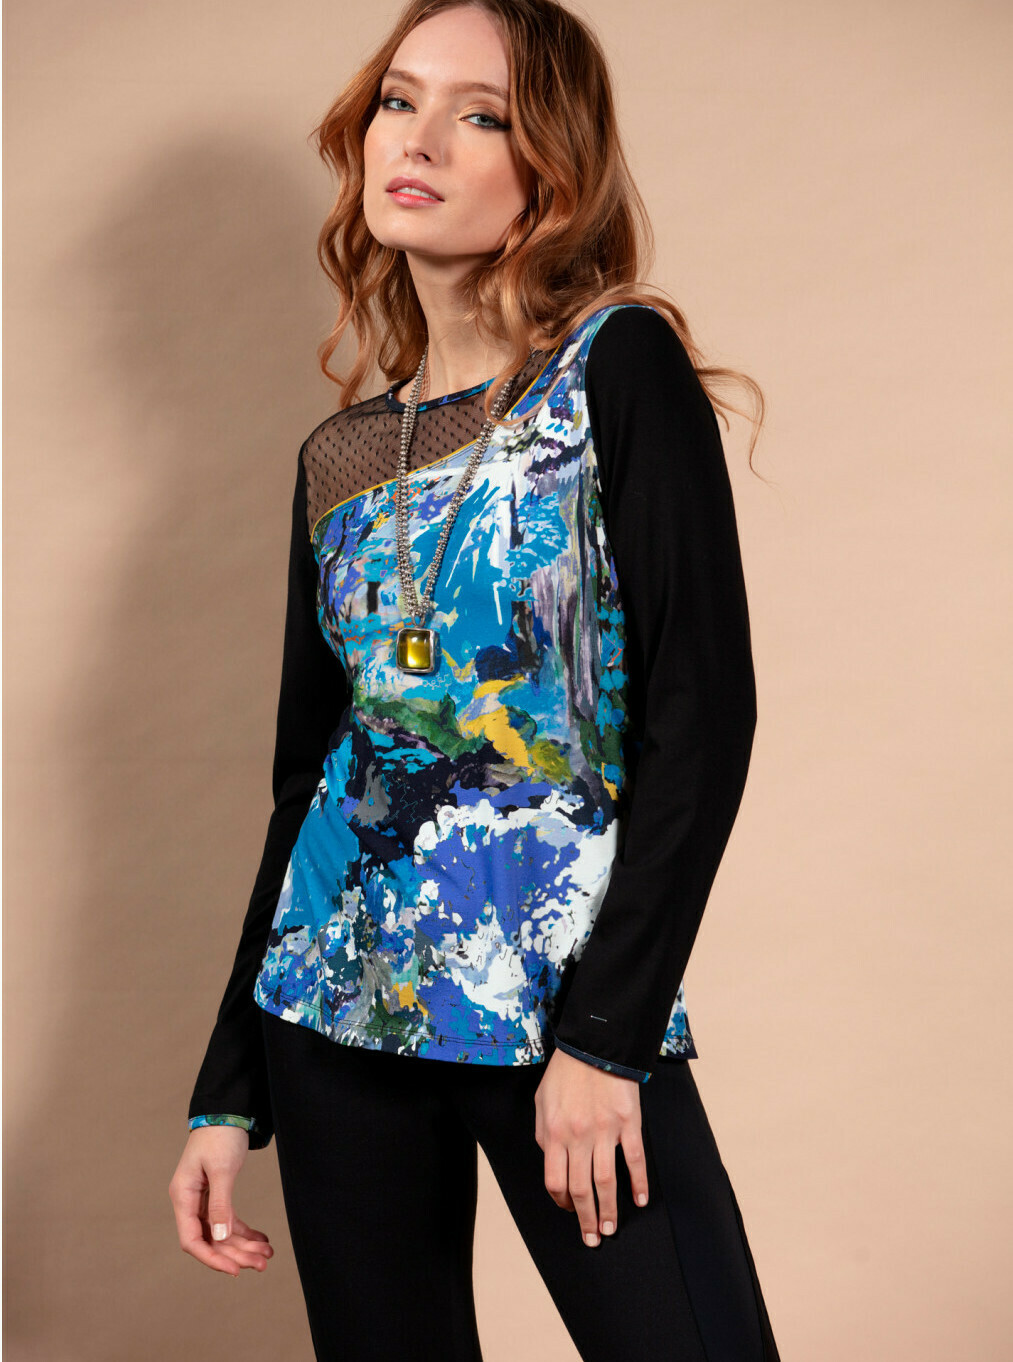 Maloka: Blue Beauty Abstract Art Tunic SOLD OUT